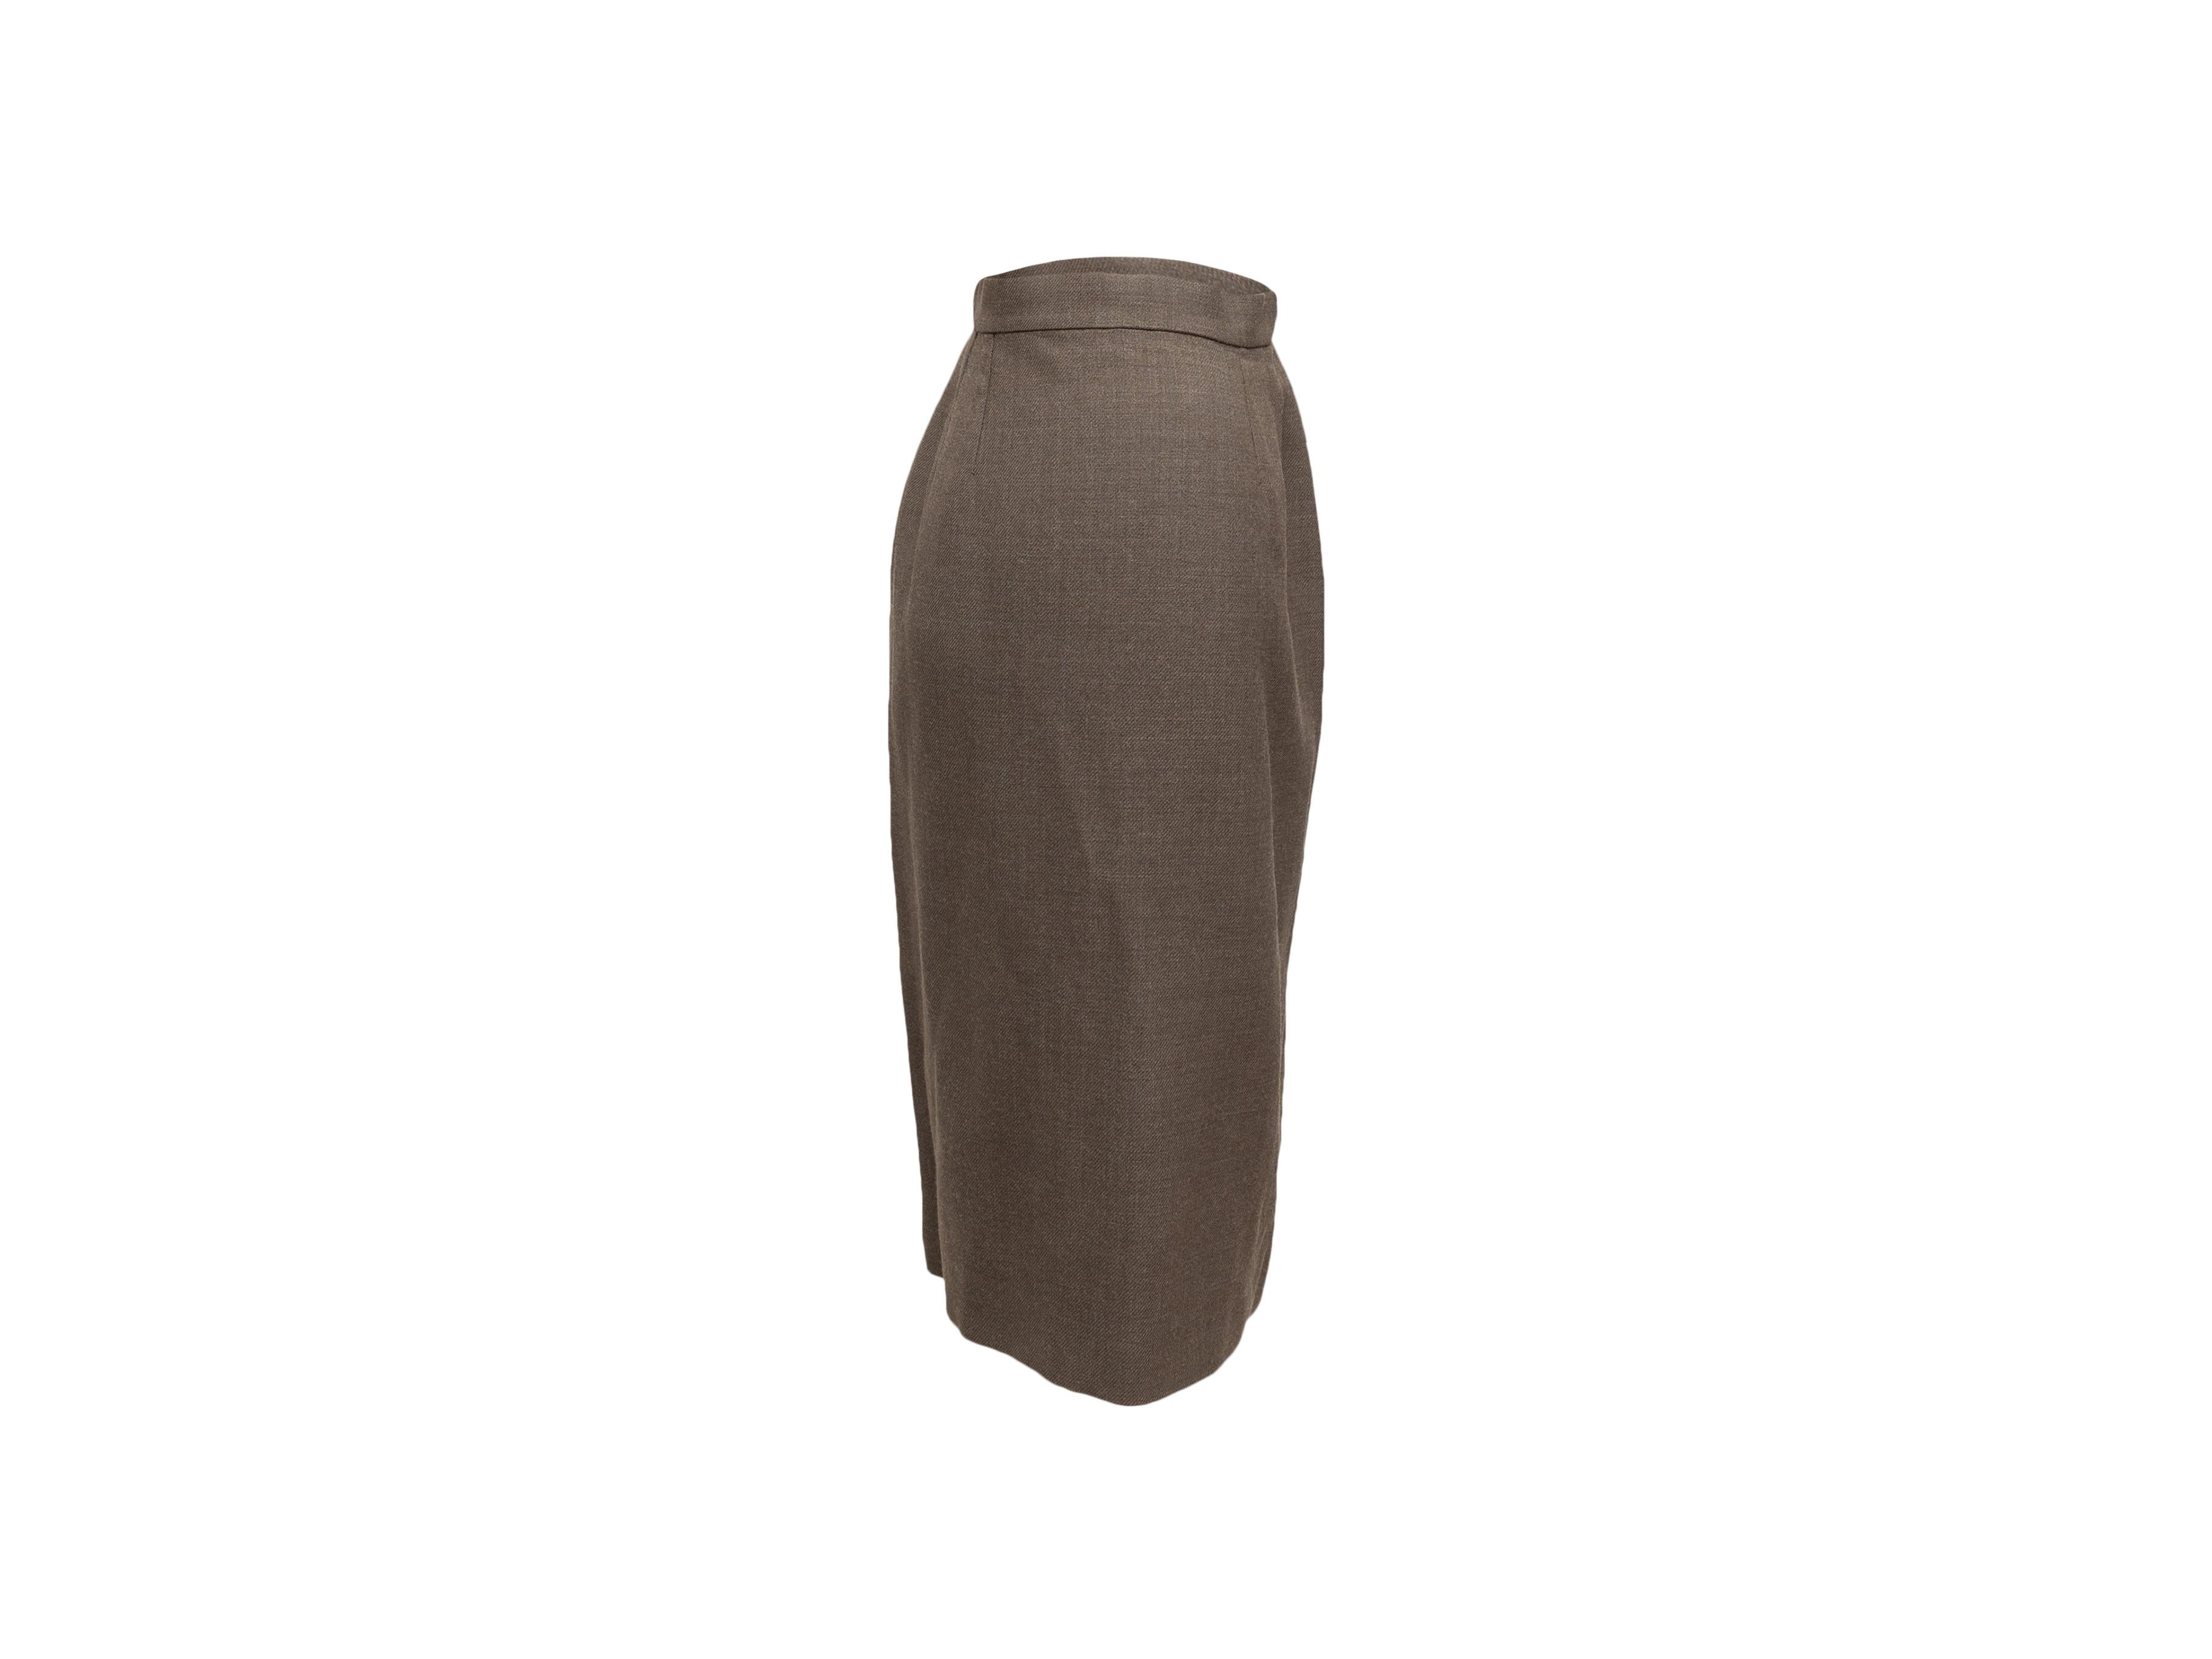 Product details: Vintage light brown wool knee-length skirt by Chanel Boutique. Concealed zip and gold-tone CC button closures at side. 27